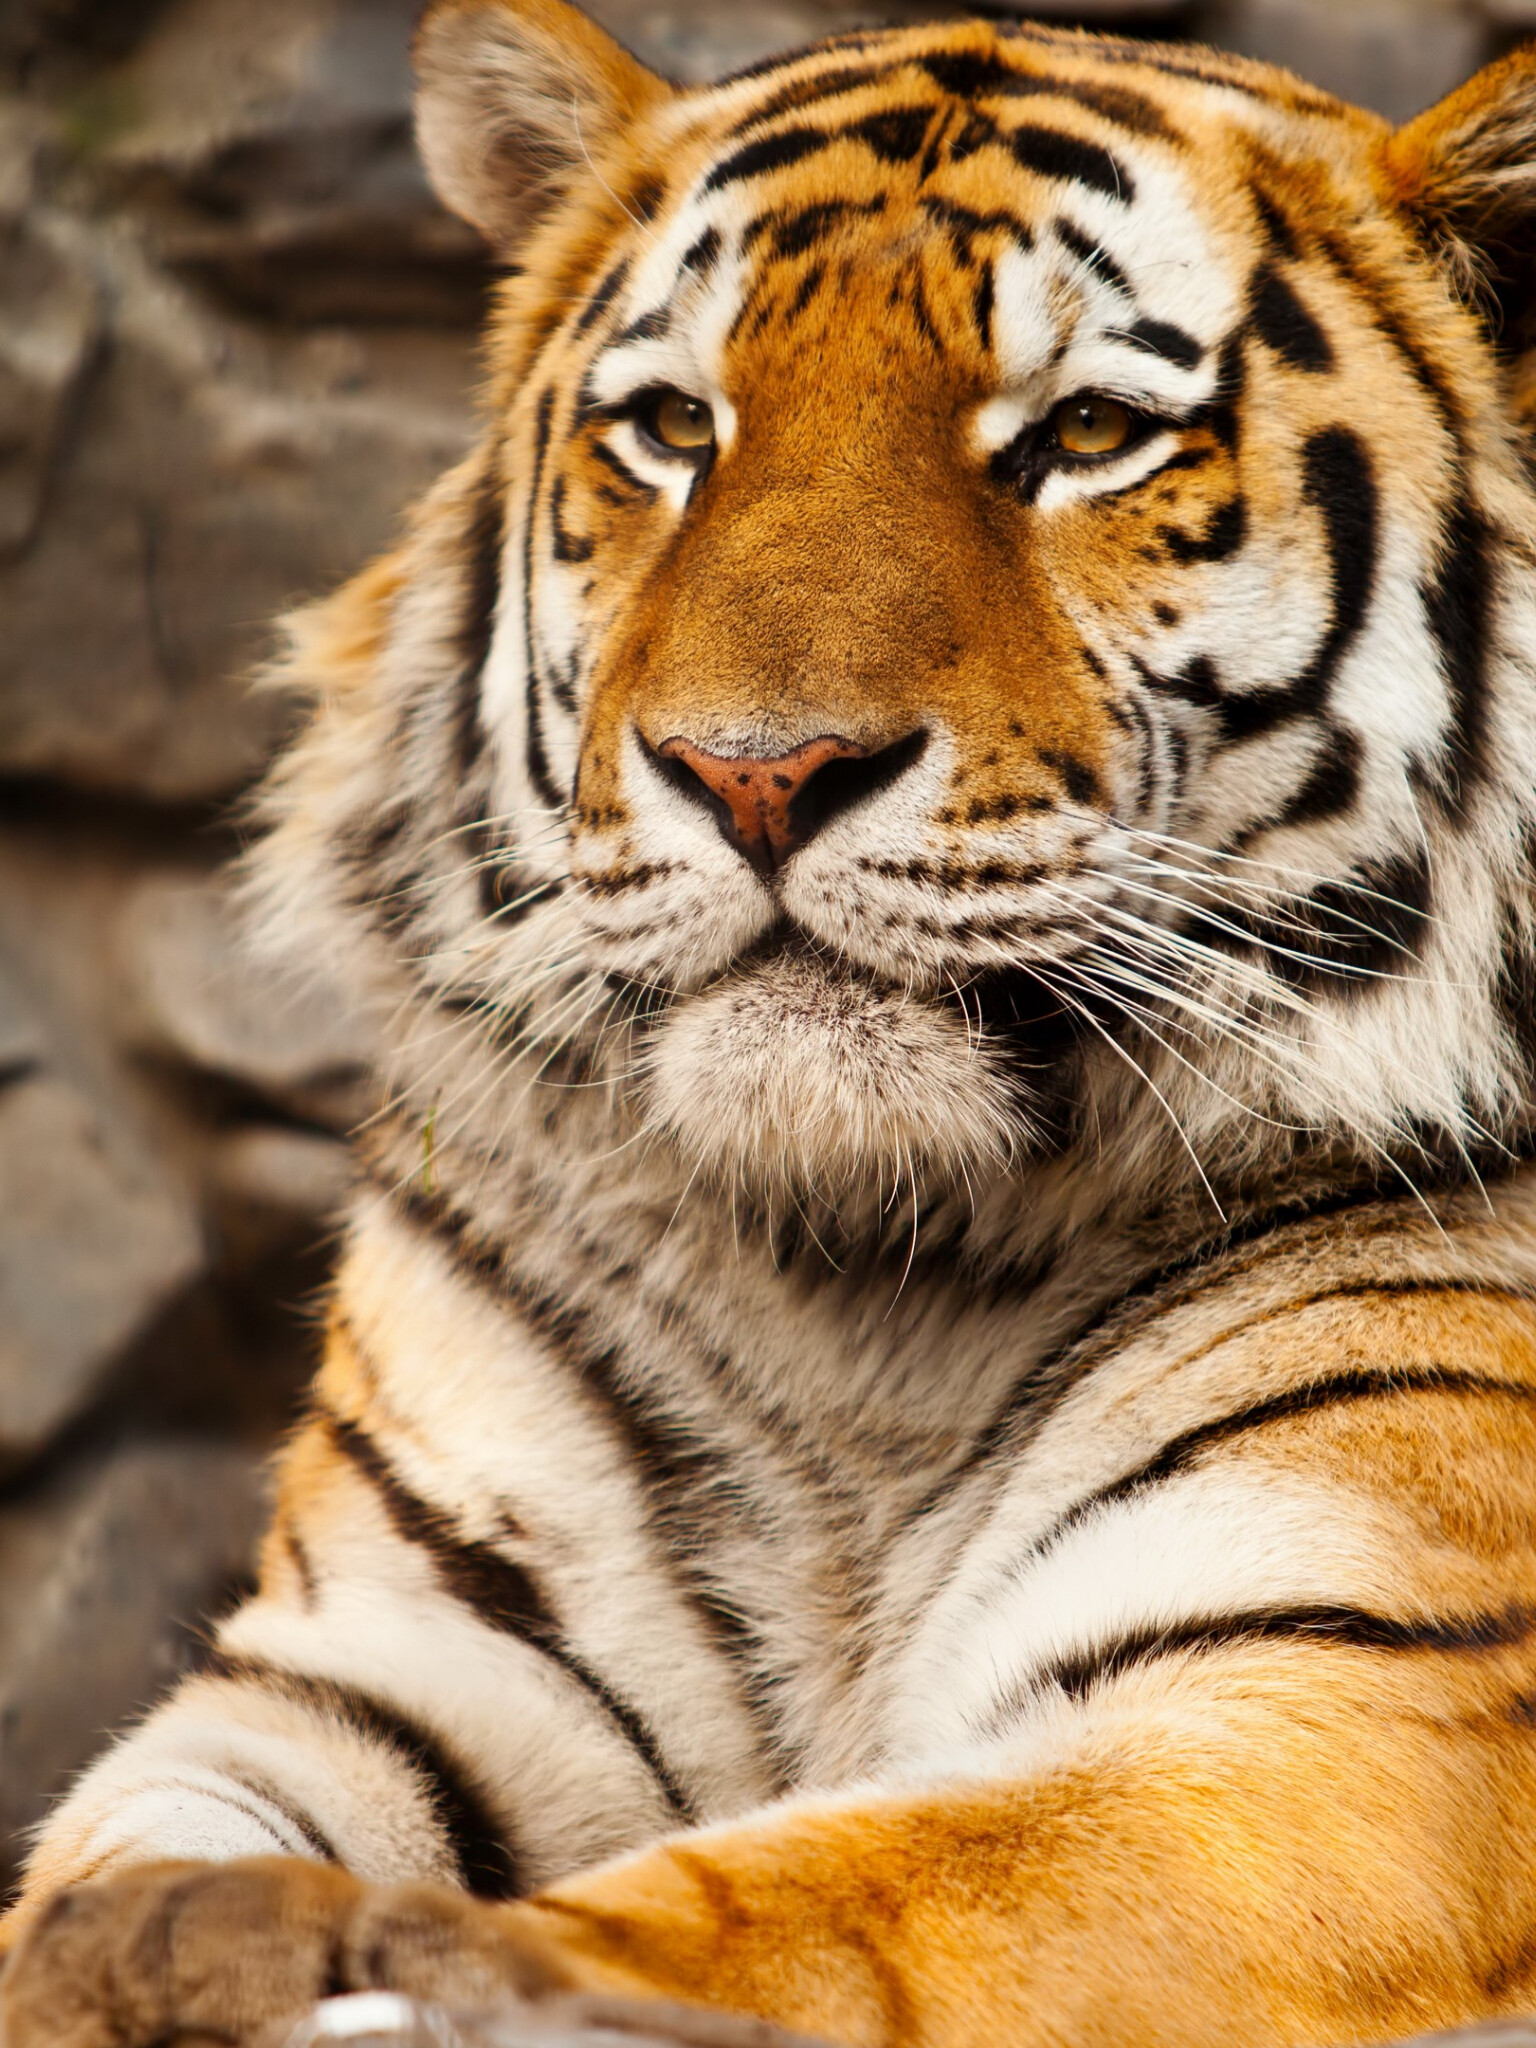 Tiger Images HD, Exquisite detailing, Close-up shots, Stunning visuals, 1540x2050 HD Phone